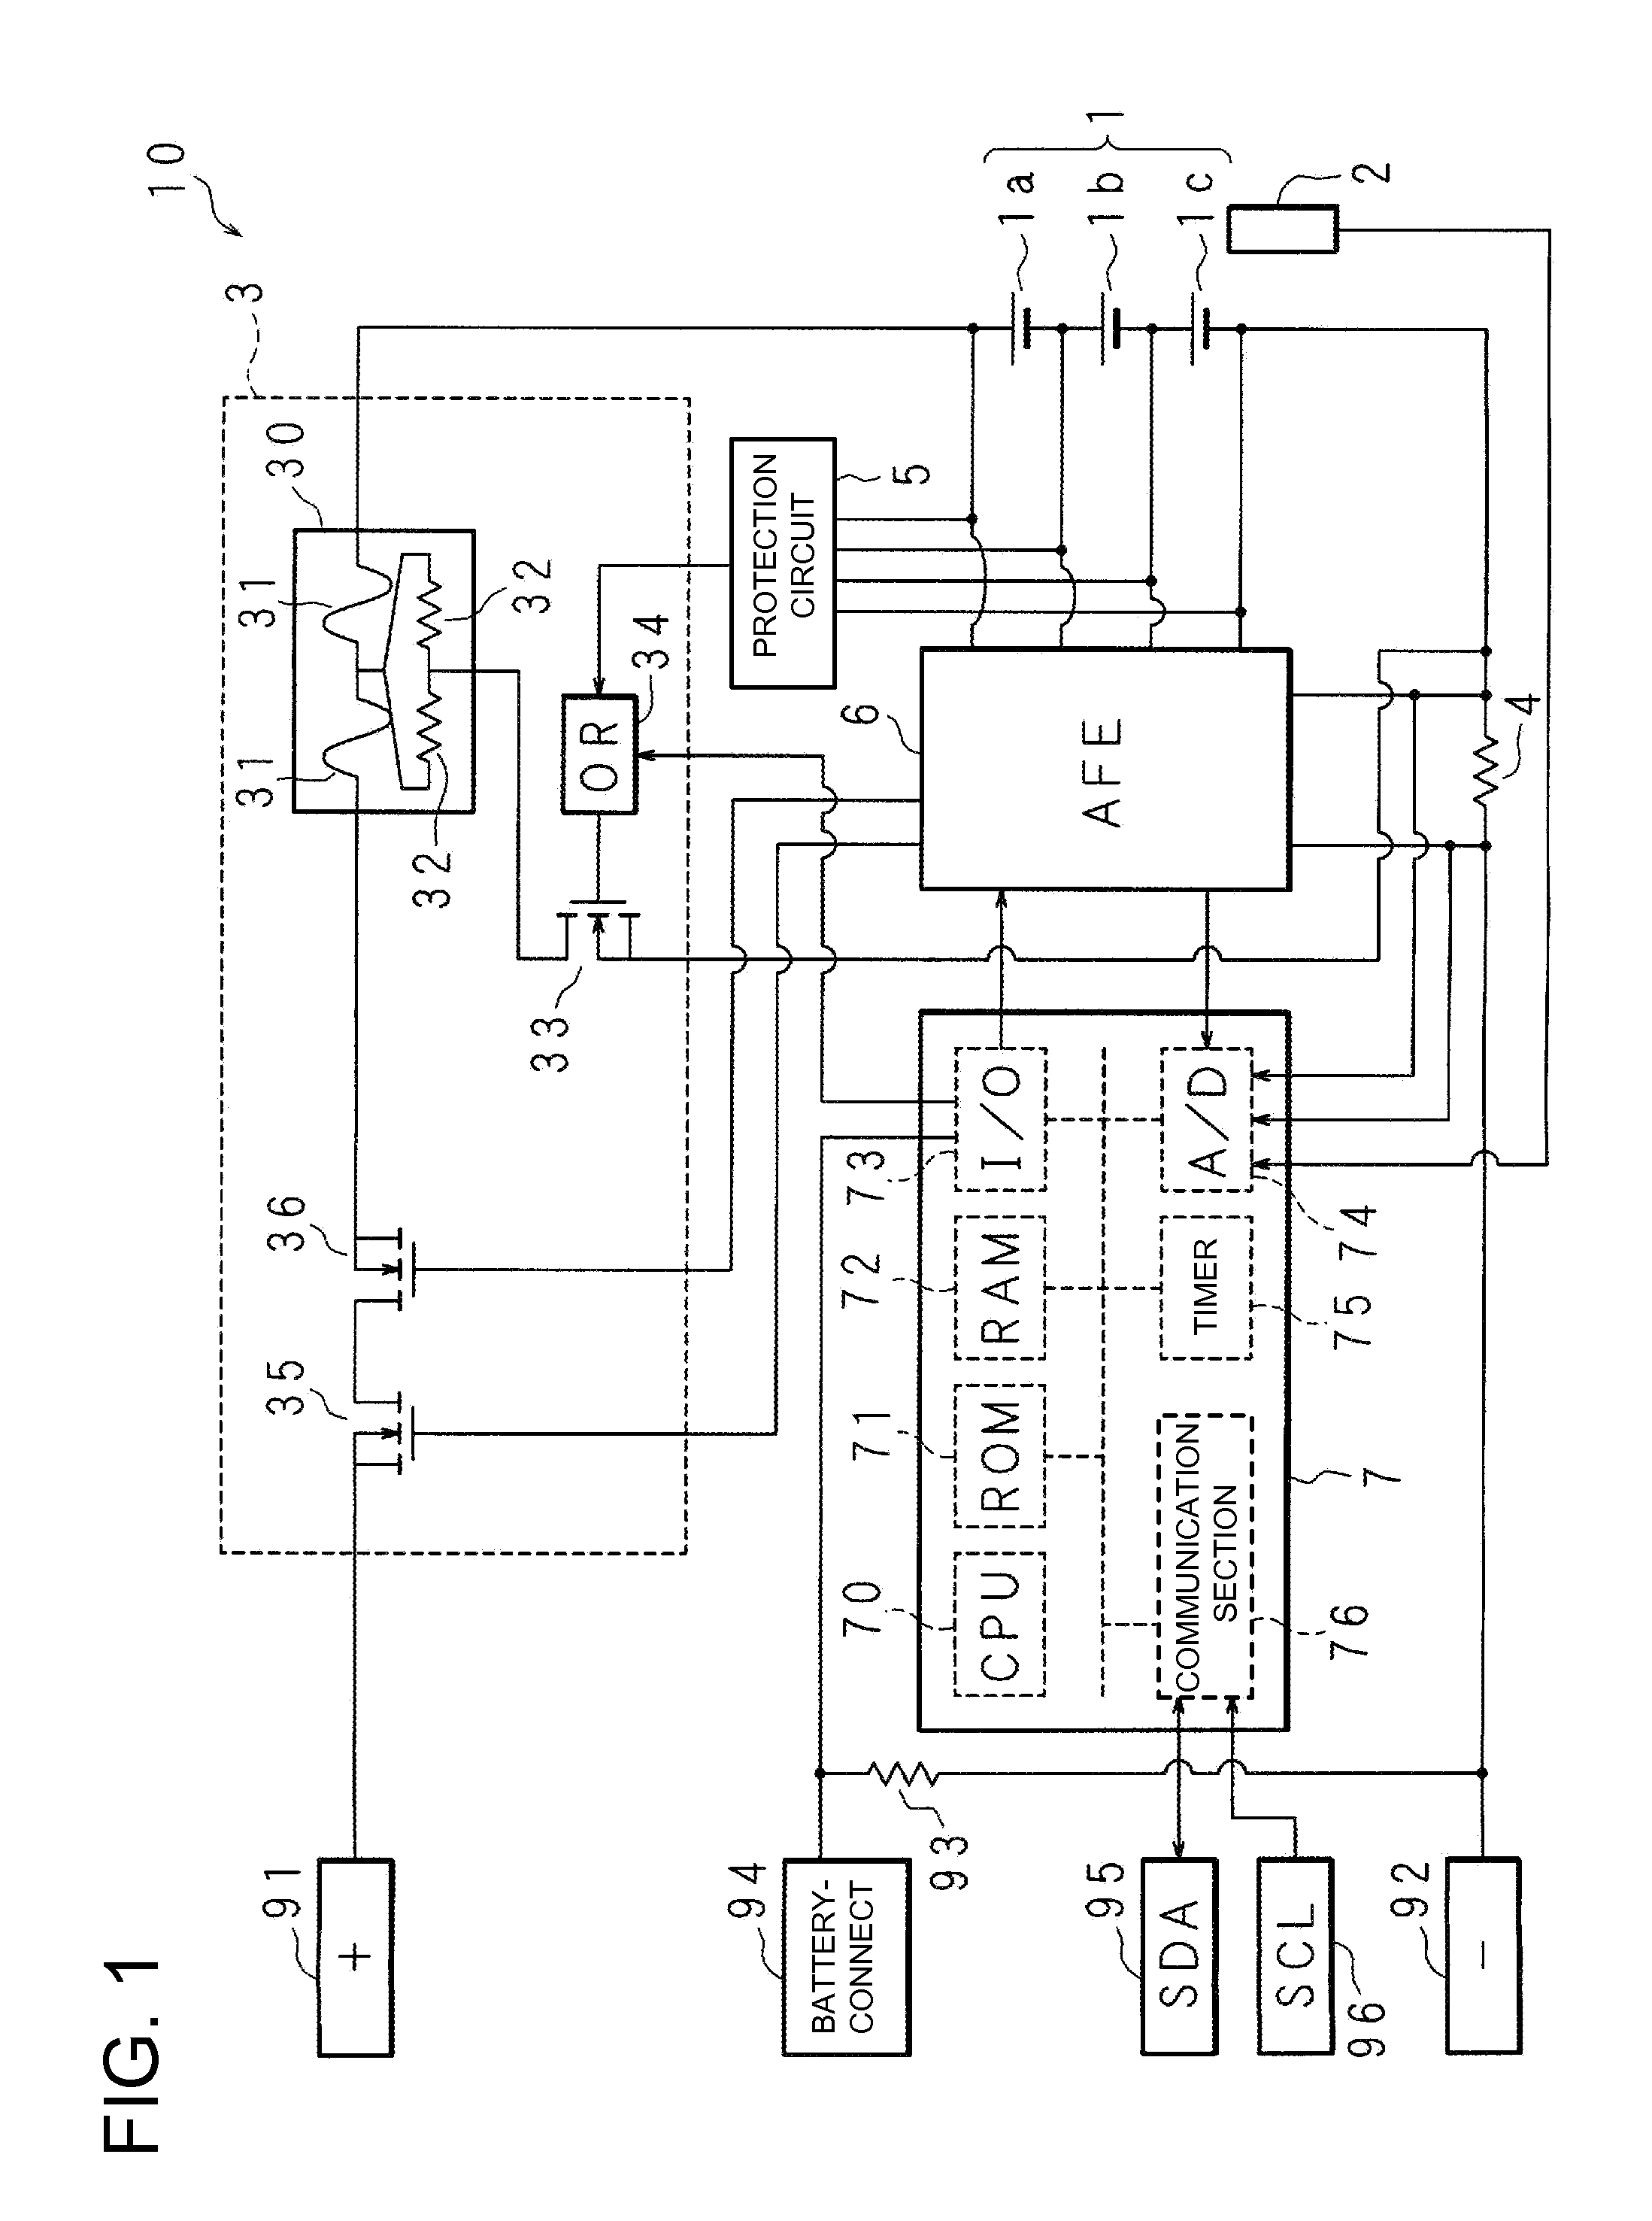 Battery pack, method of determining malfunction, and a malfunction decision circuit